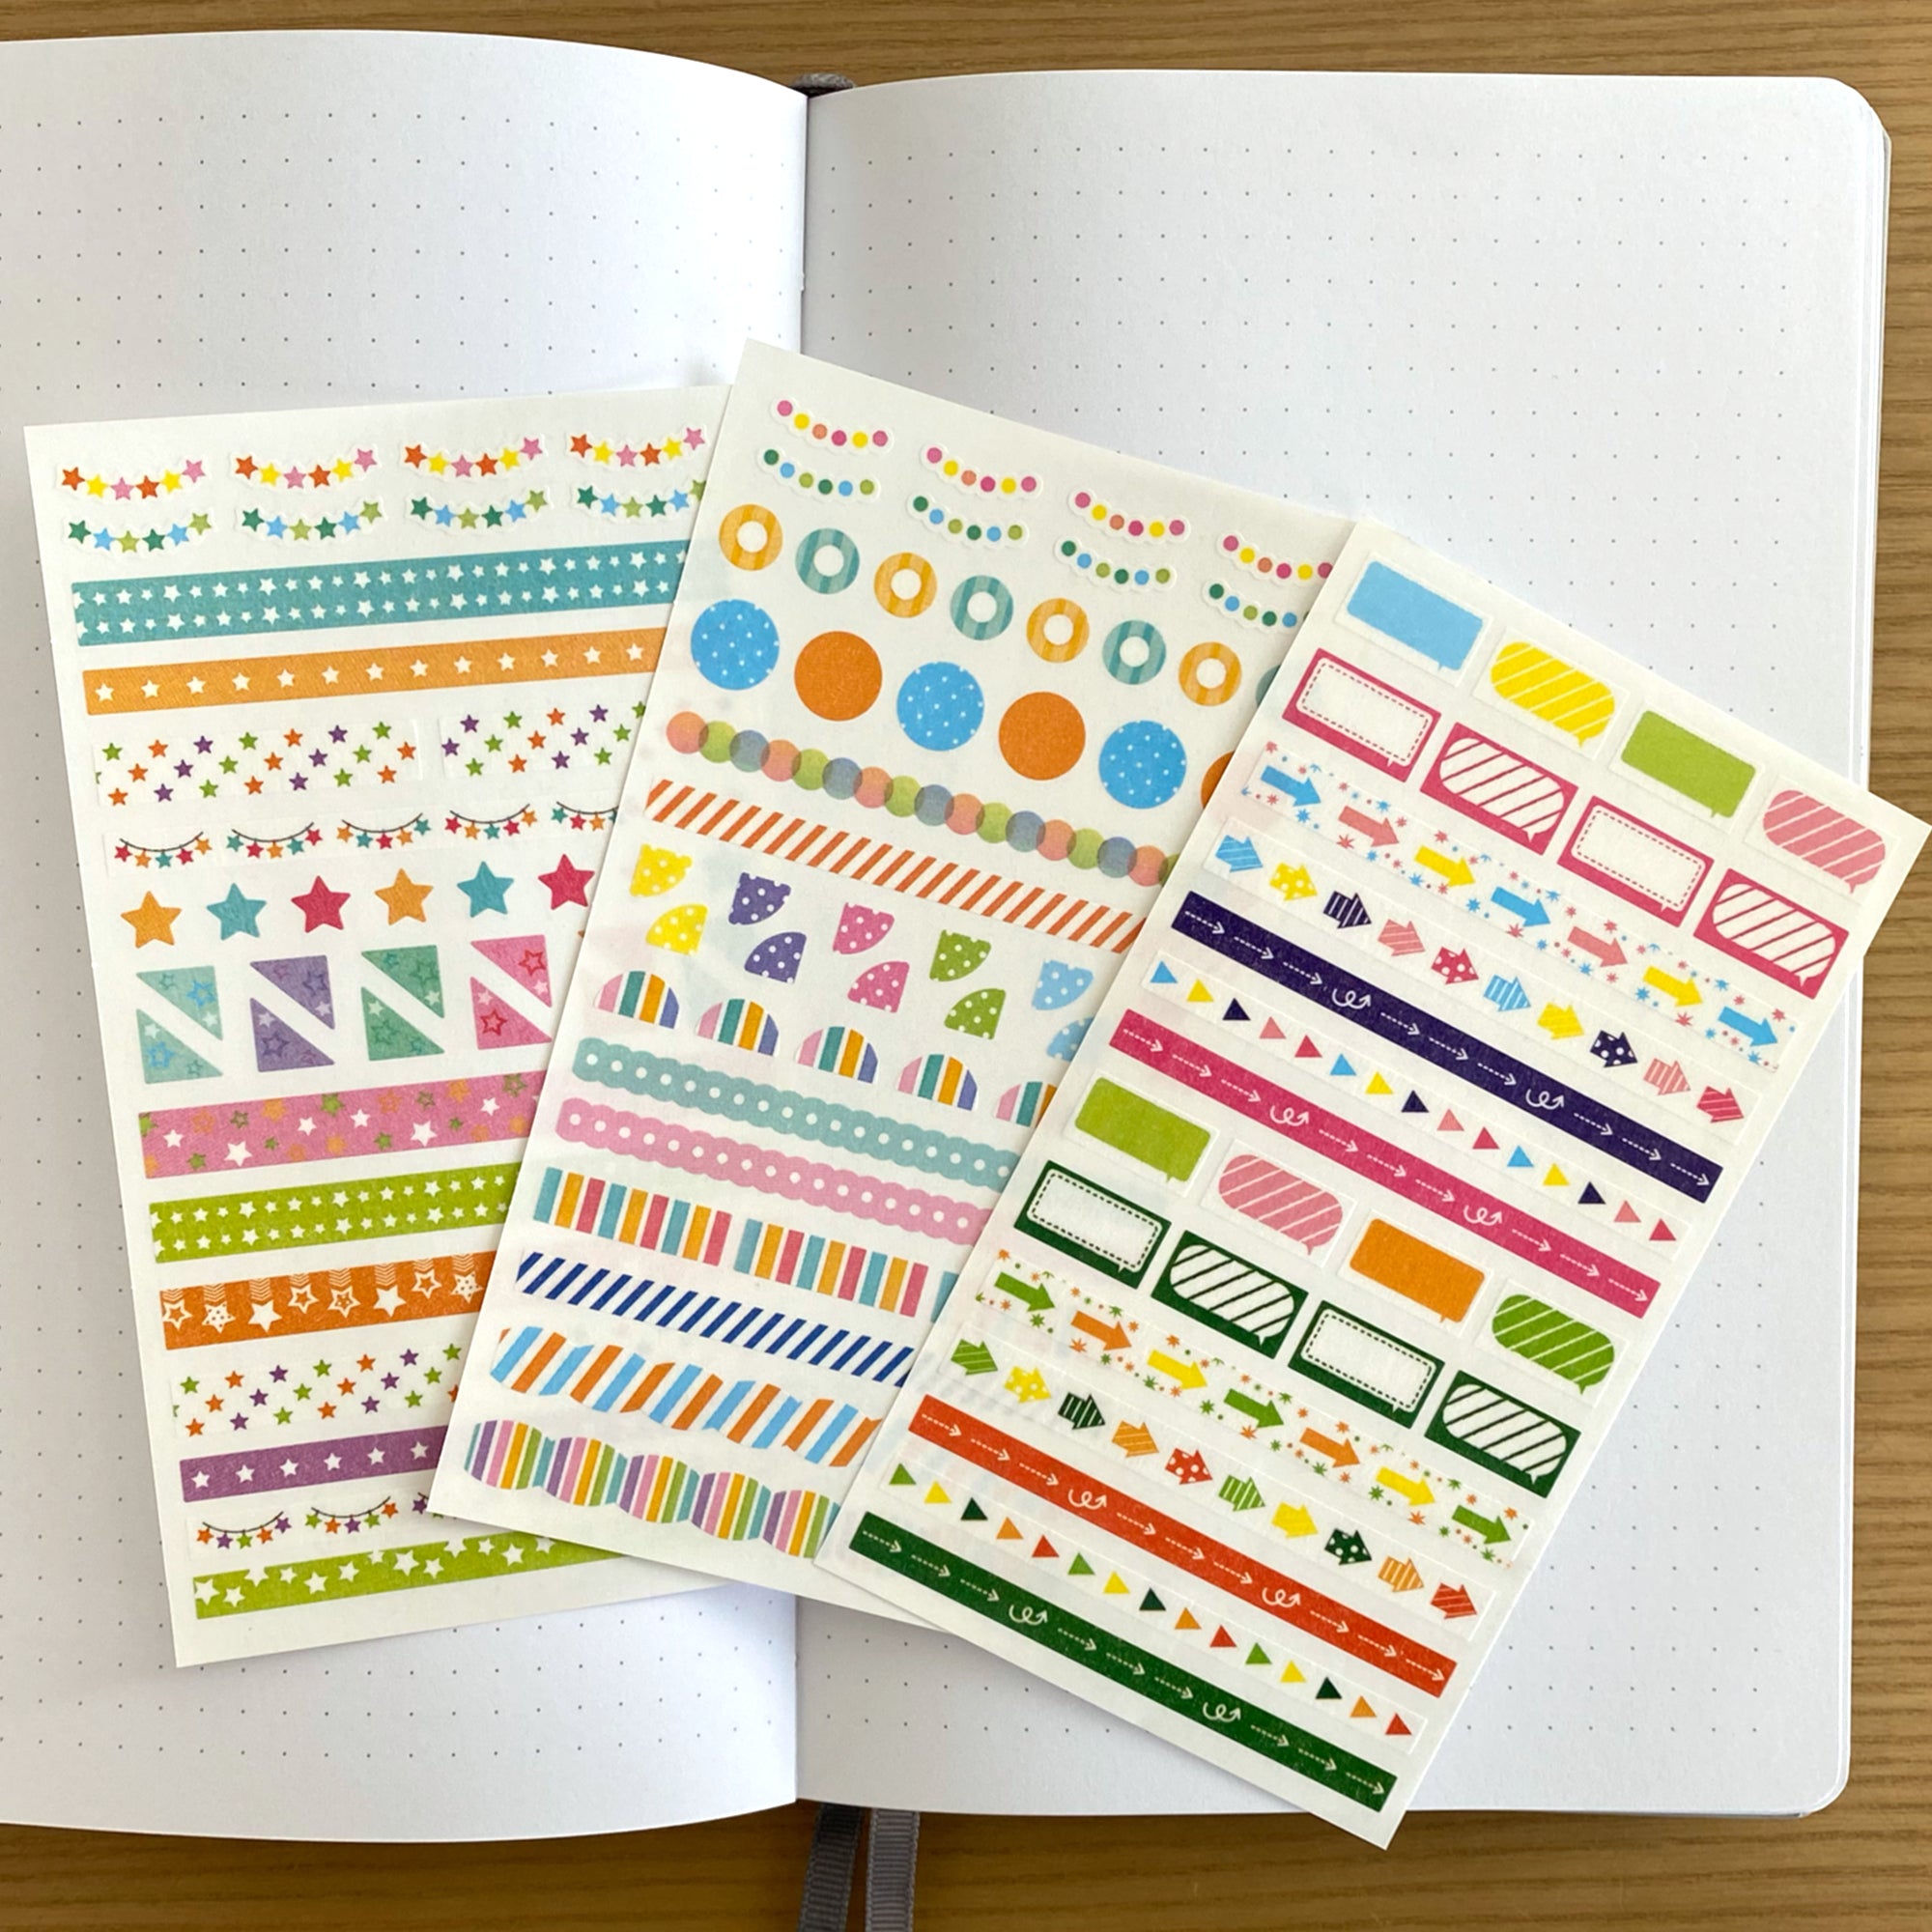 Bullet Journal stickers (17+ Brilliant Stickers For Your Planner And Journal )